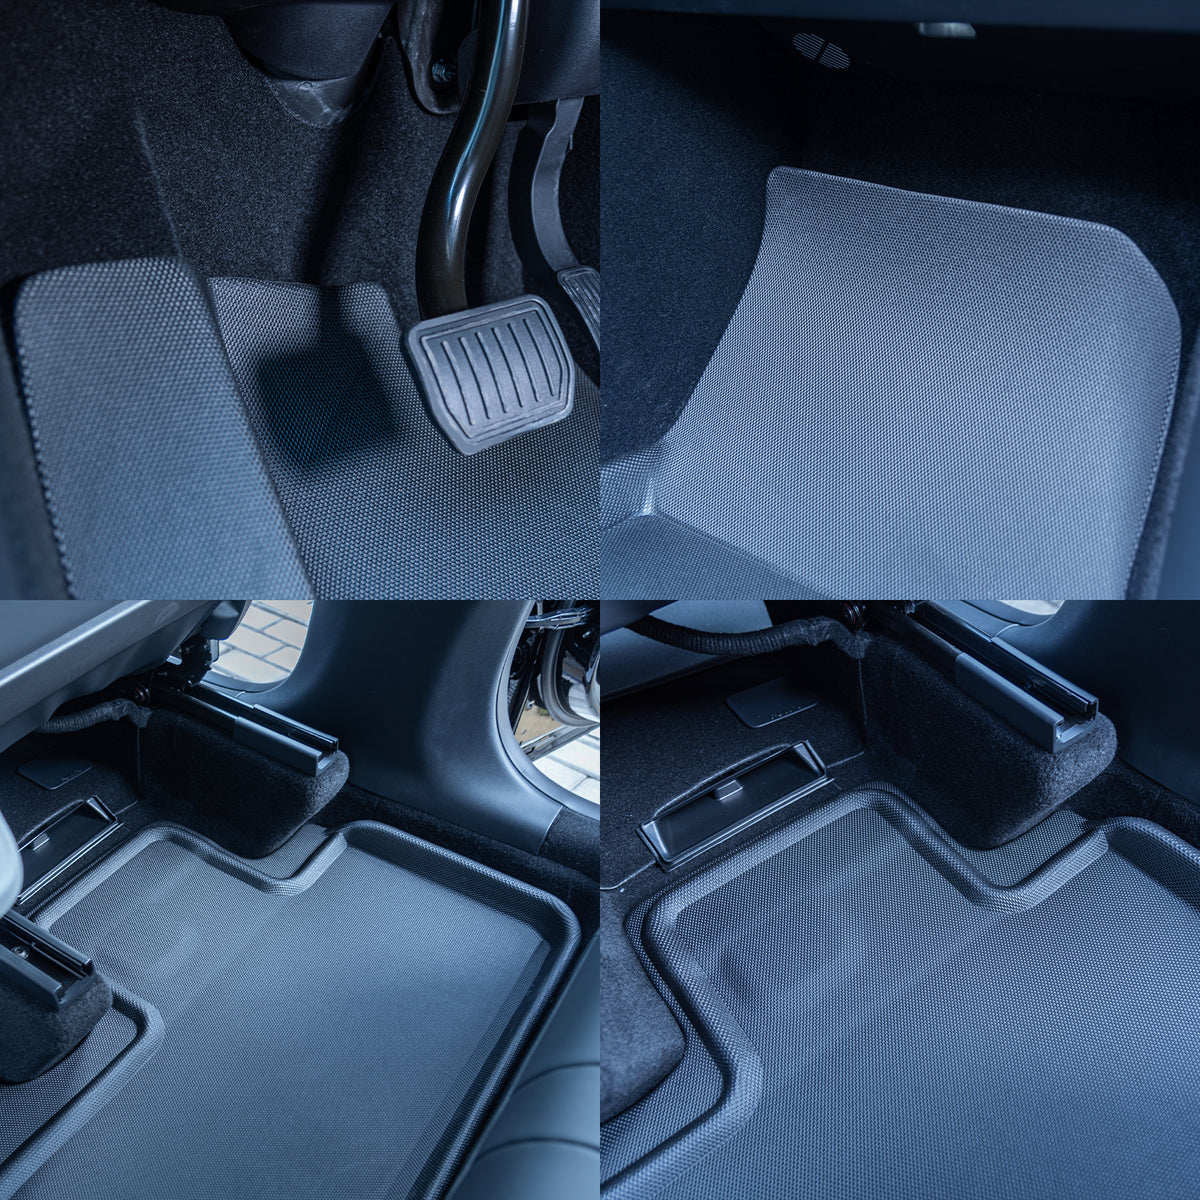 Turoaz Right-Hand Drive Floor Mats Fit For Tesla Model Y 2021up, Floor Liners, Interior Accessories (1st & 2nd Row for 5 or 7 Seats)